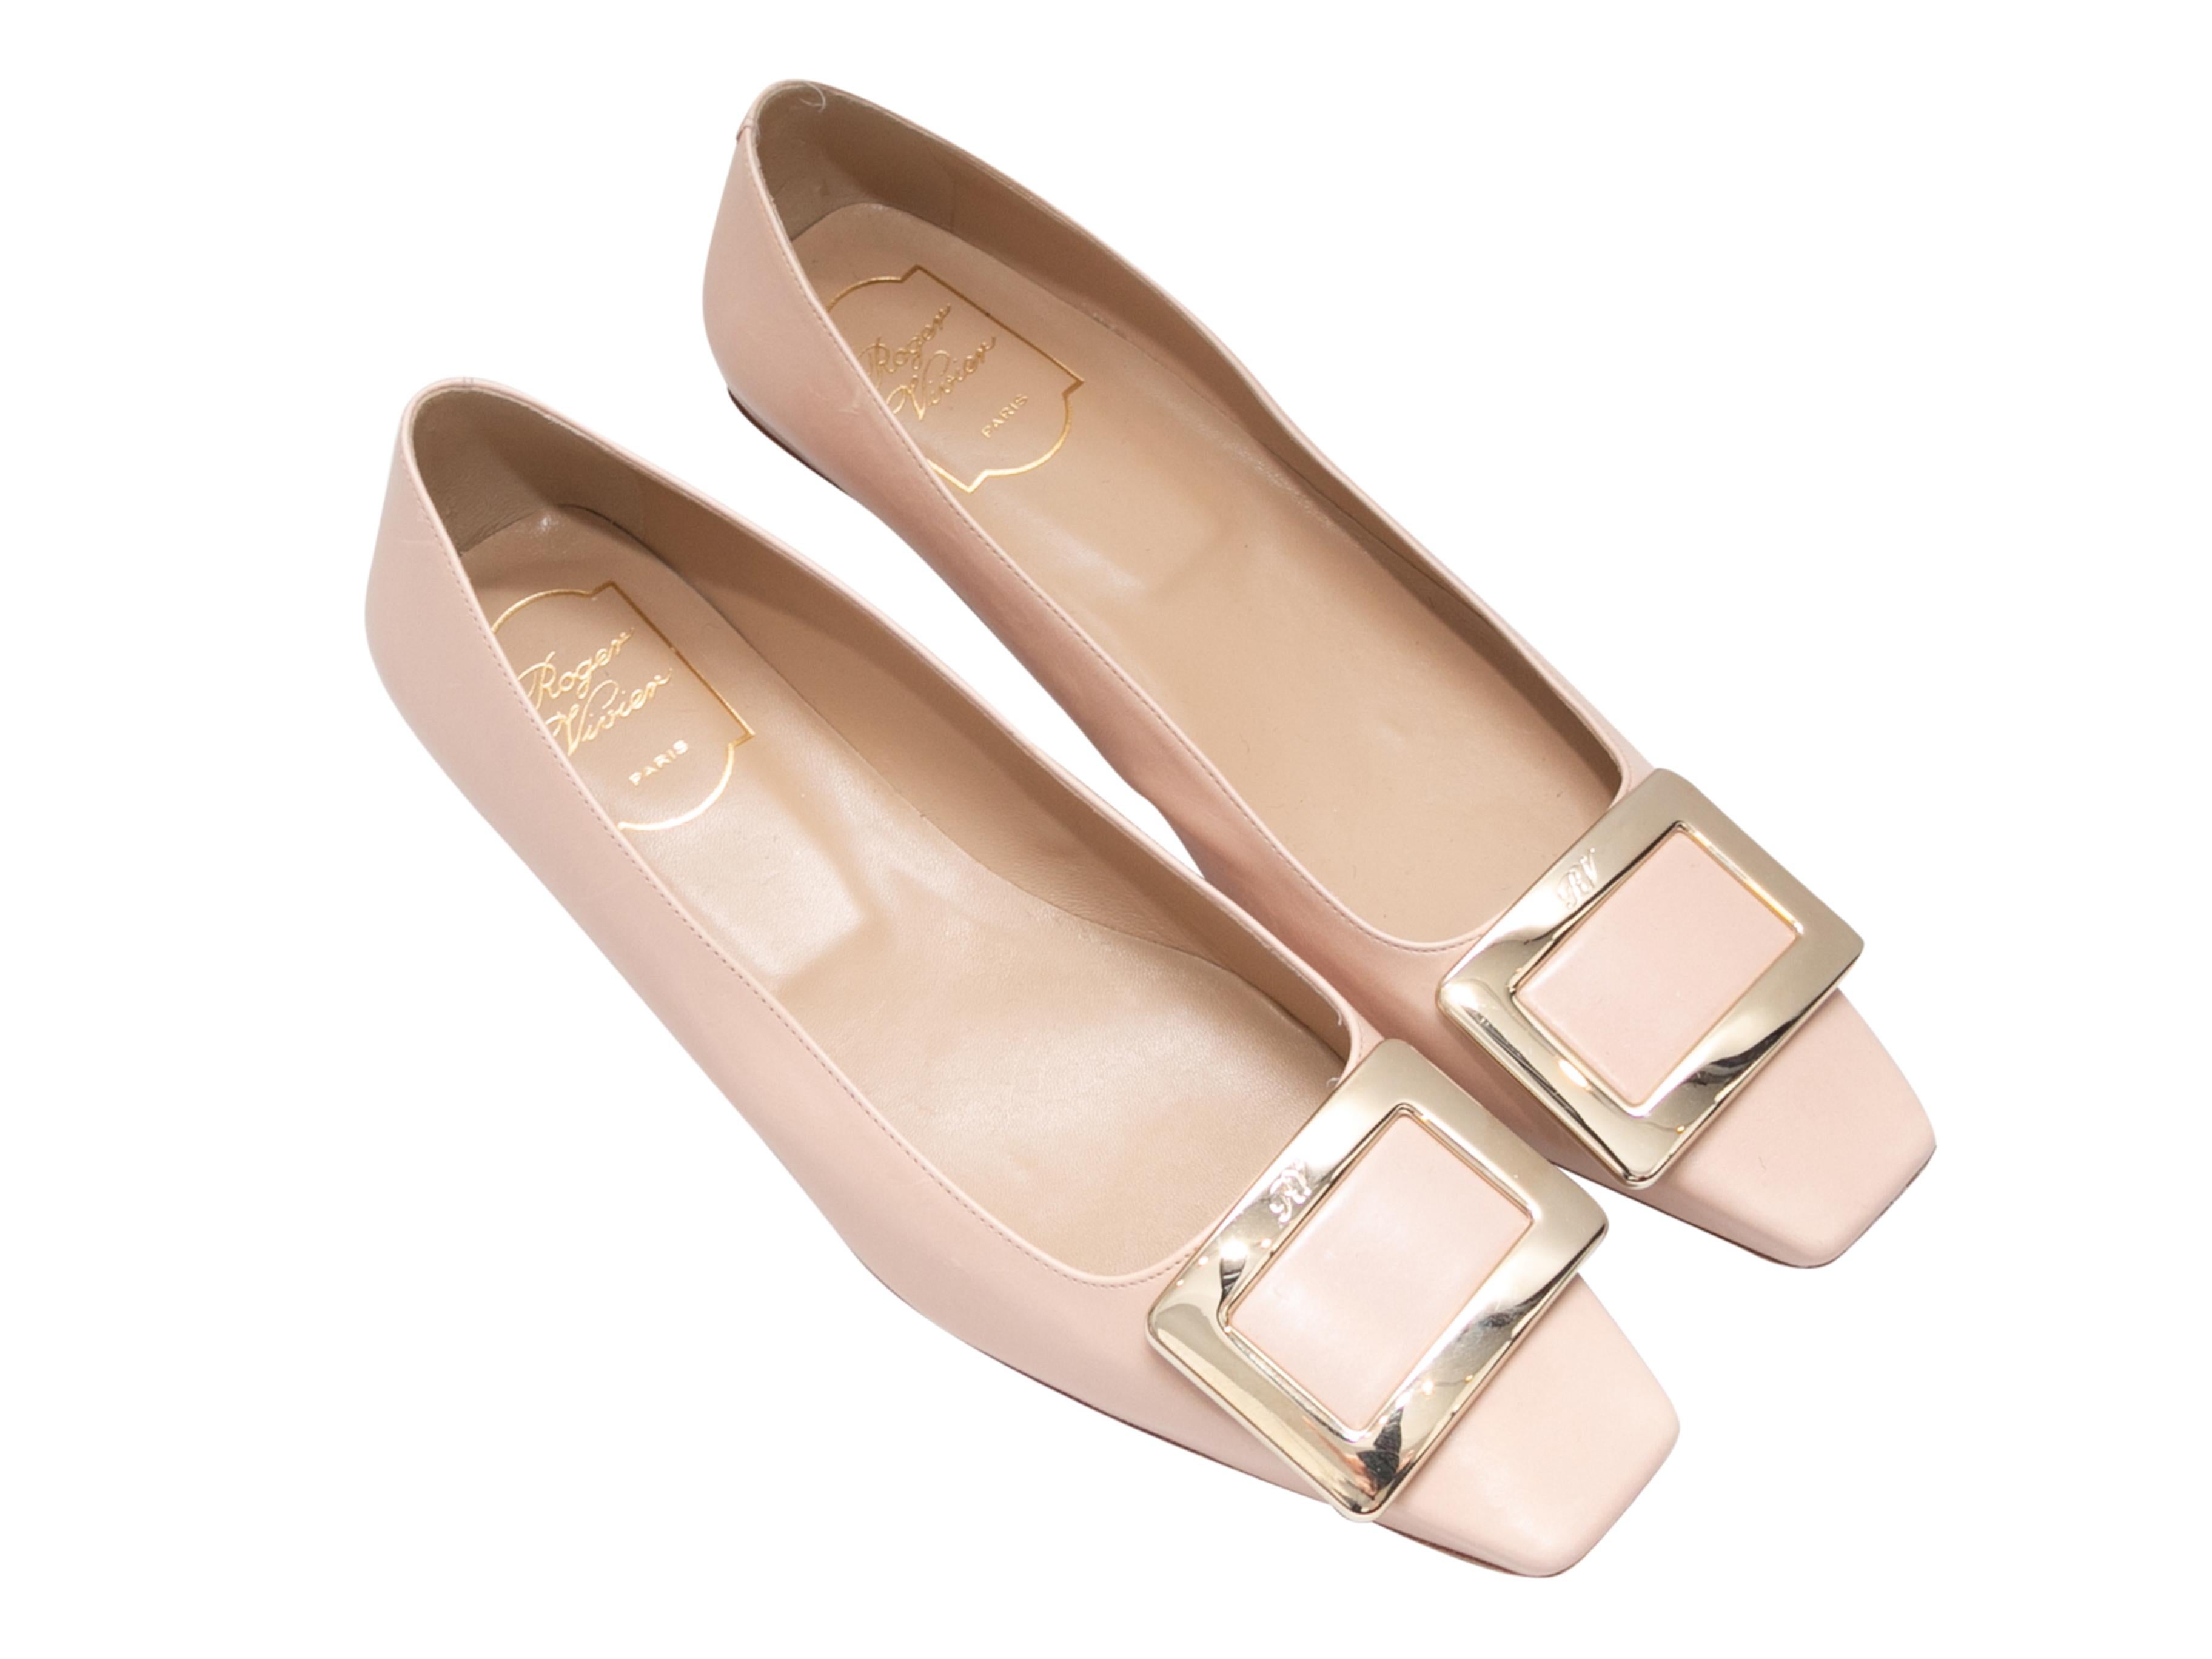  Beige patent leather square-toe Belle ballet flats by Roger Vivier. Gold-tone buckle accents at tops. 0.75